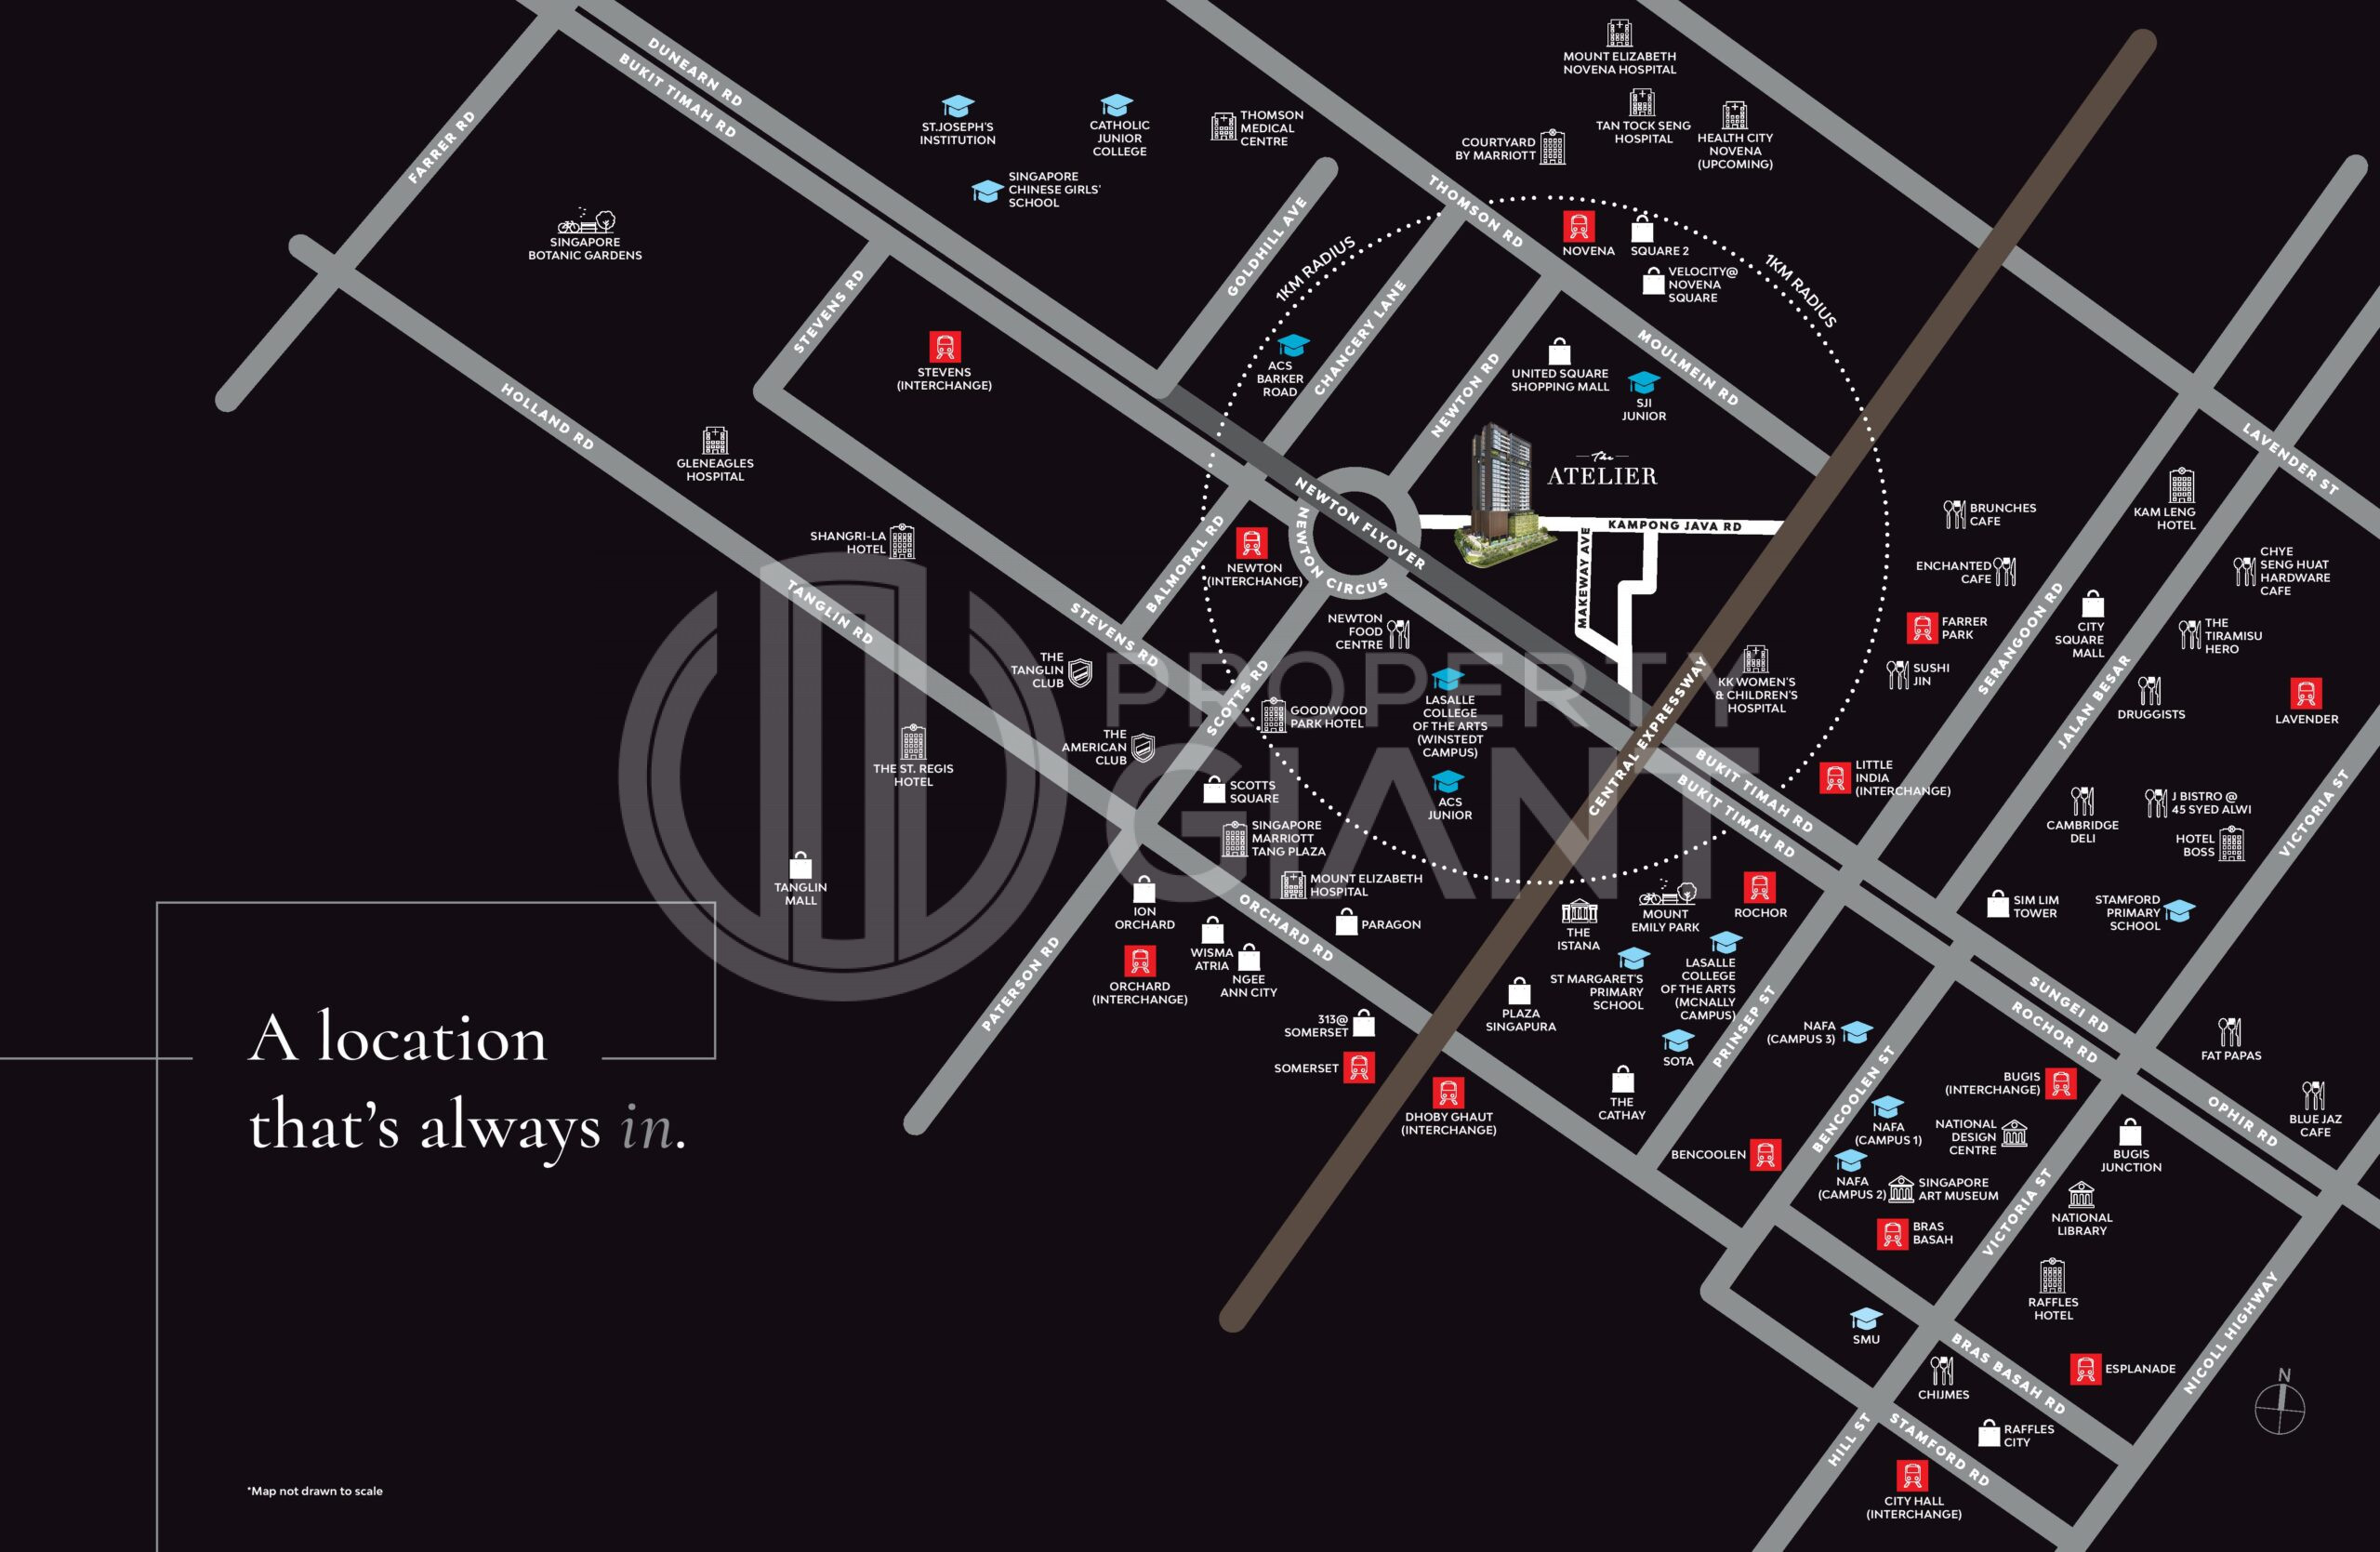 The Atelier Location Map